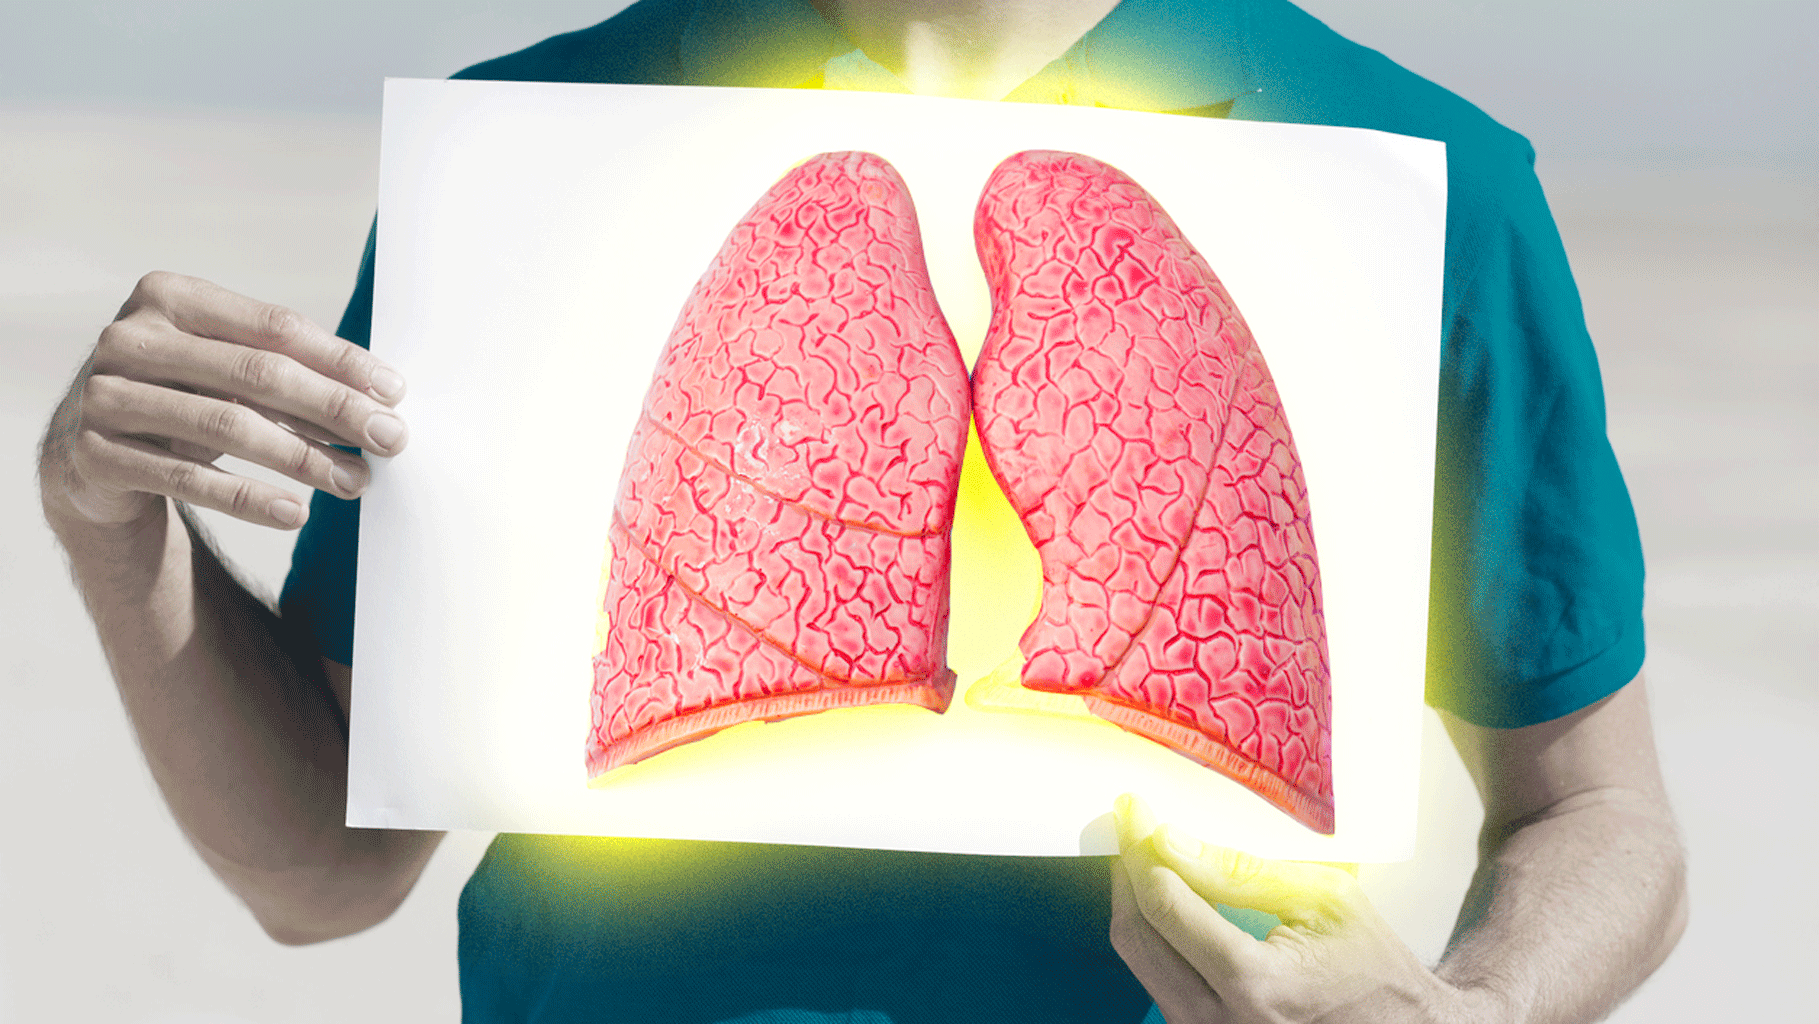 Nearly 15% of all lung cancers happen to those who’ve never smoked in their life. Is it just a stroke of luck or genes gone amok? 